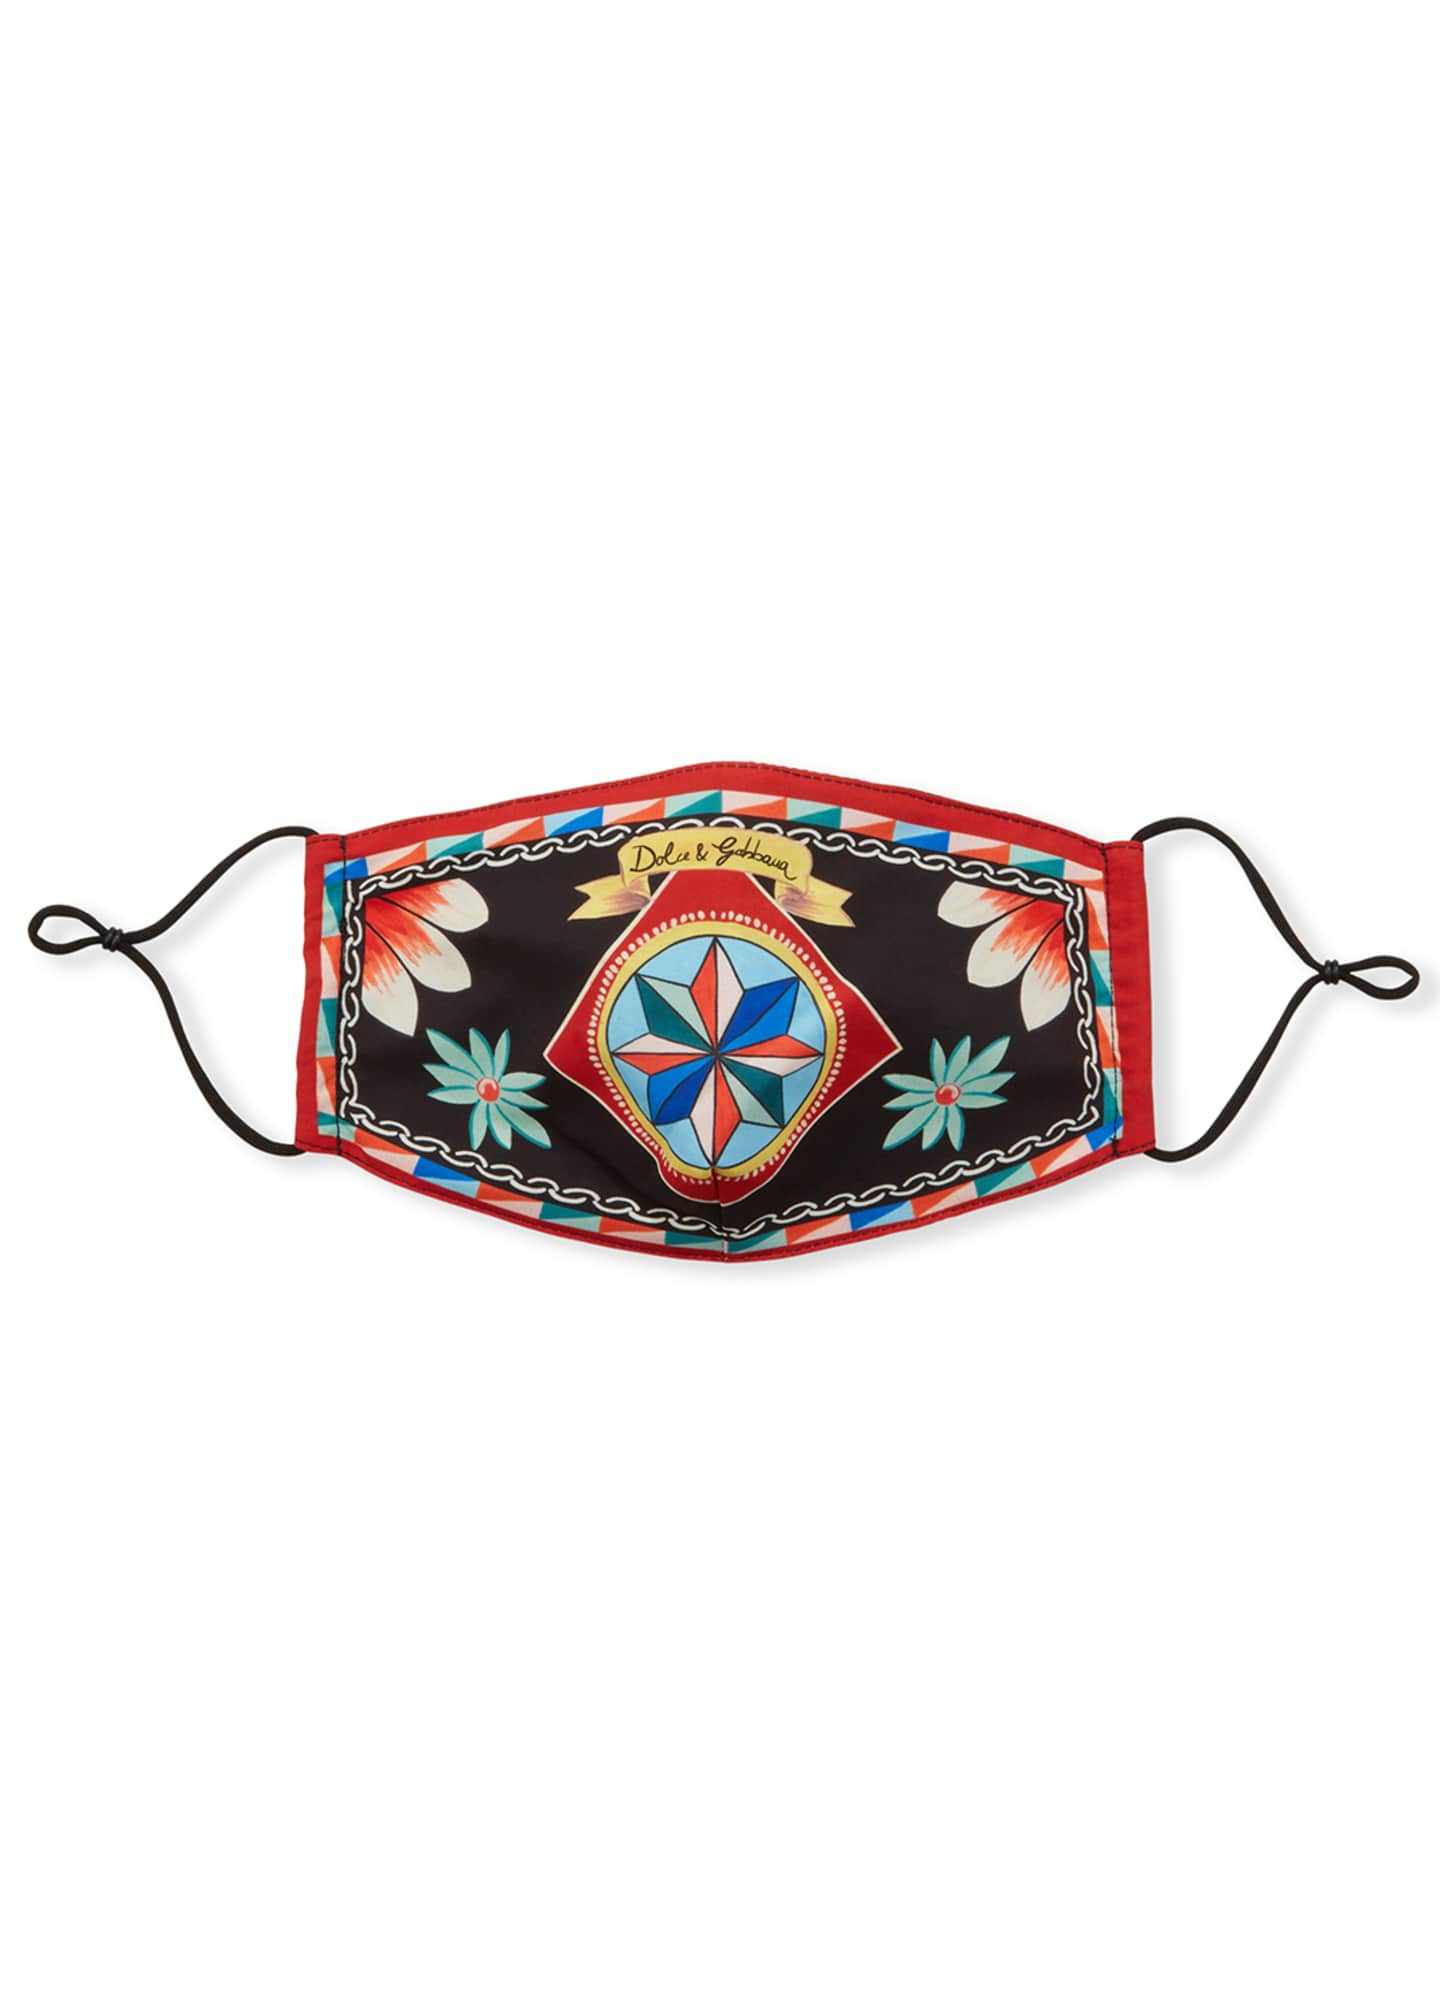 Dolce & Gabbana Reusable Heritage Print Cloth Mask Face Covering ...